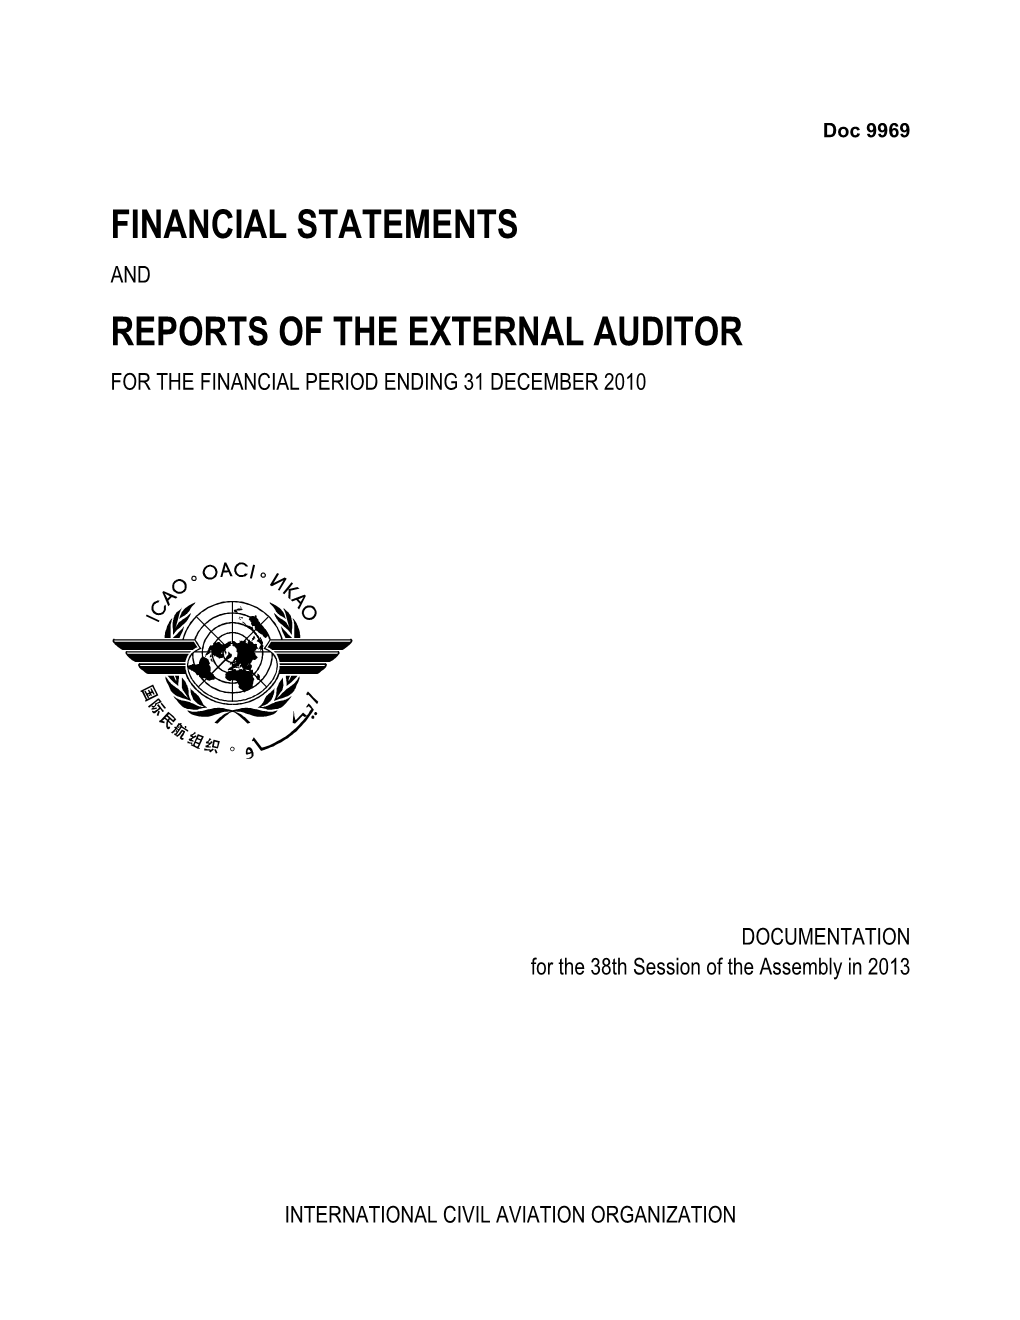 Financial Statements Reports of the External Auditor